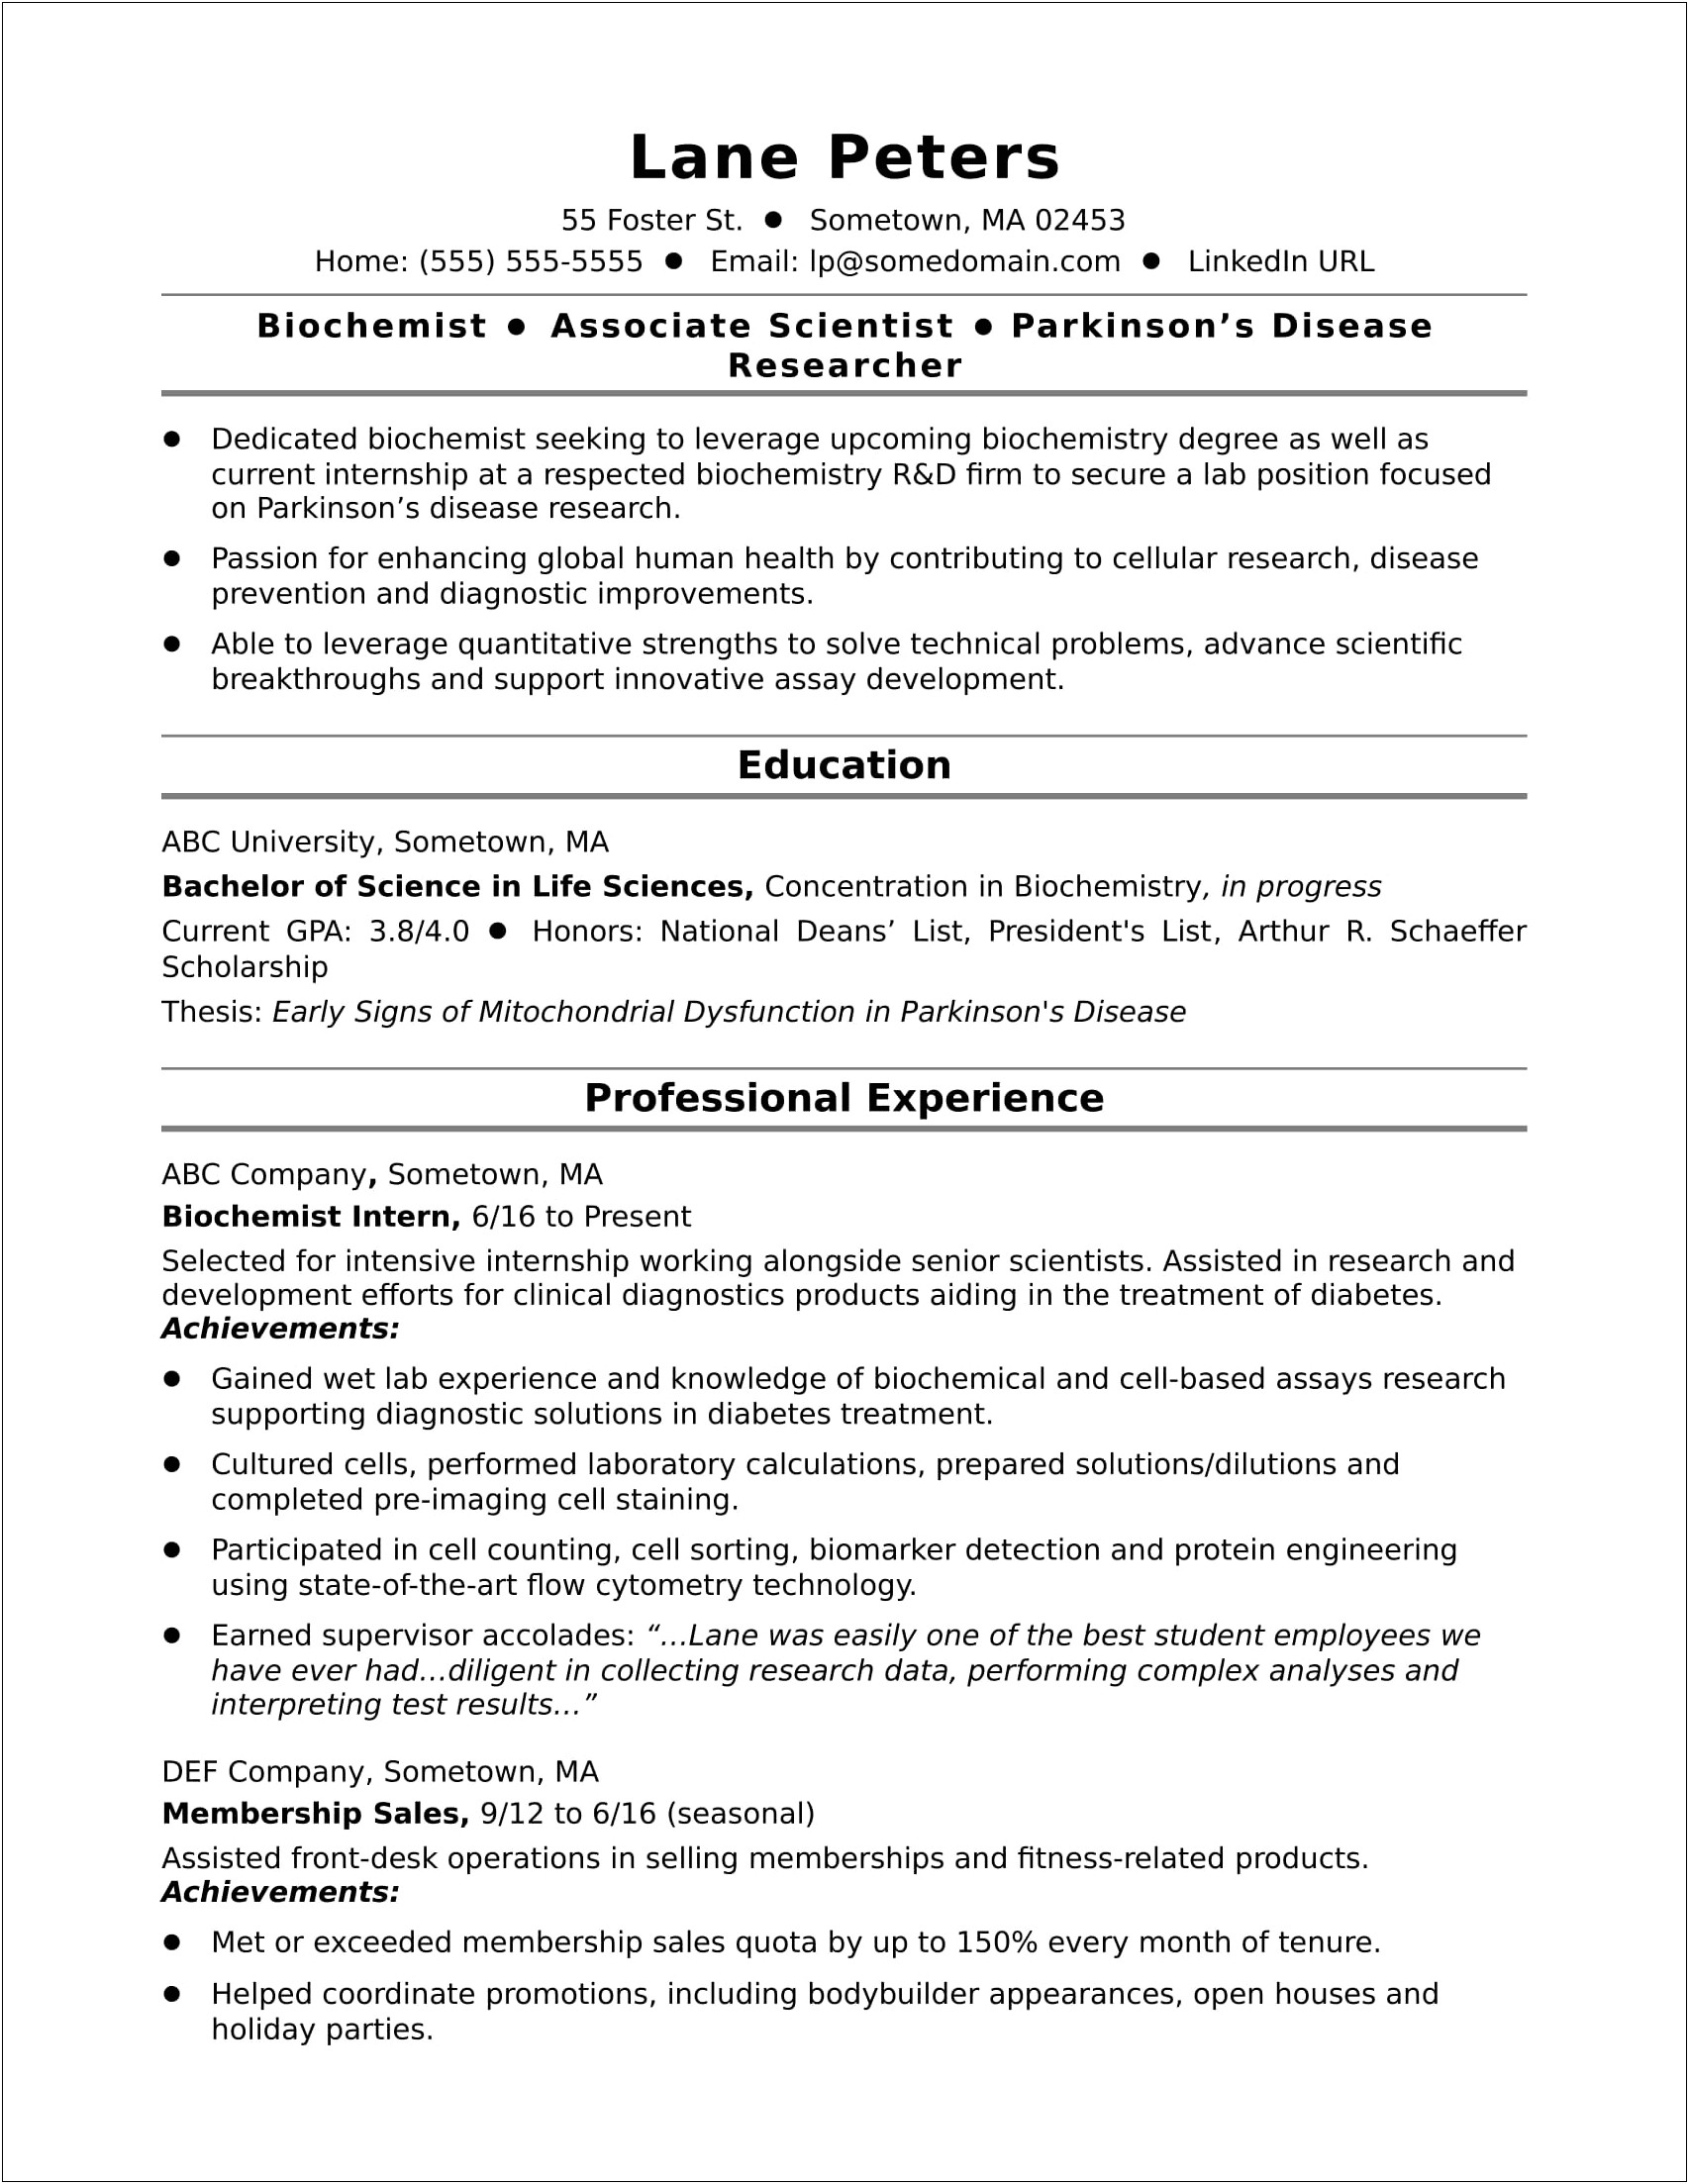 Work In Lab During Master's Degree Resume